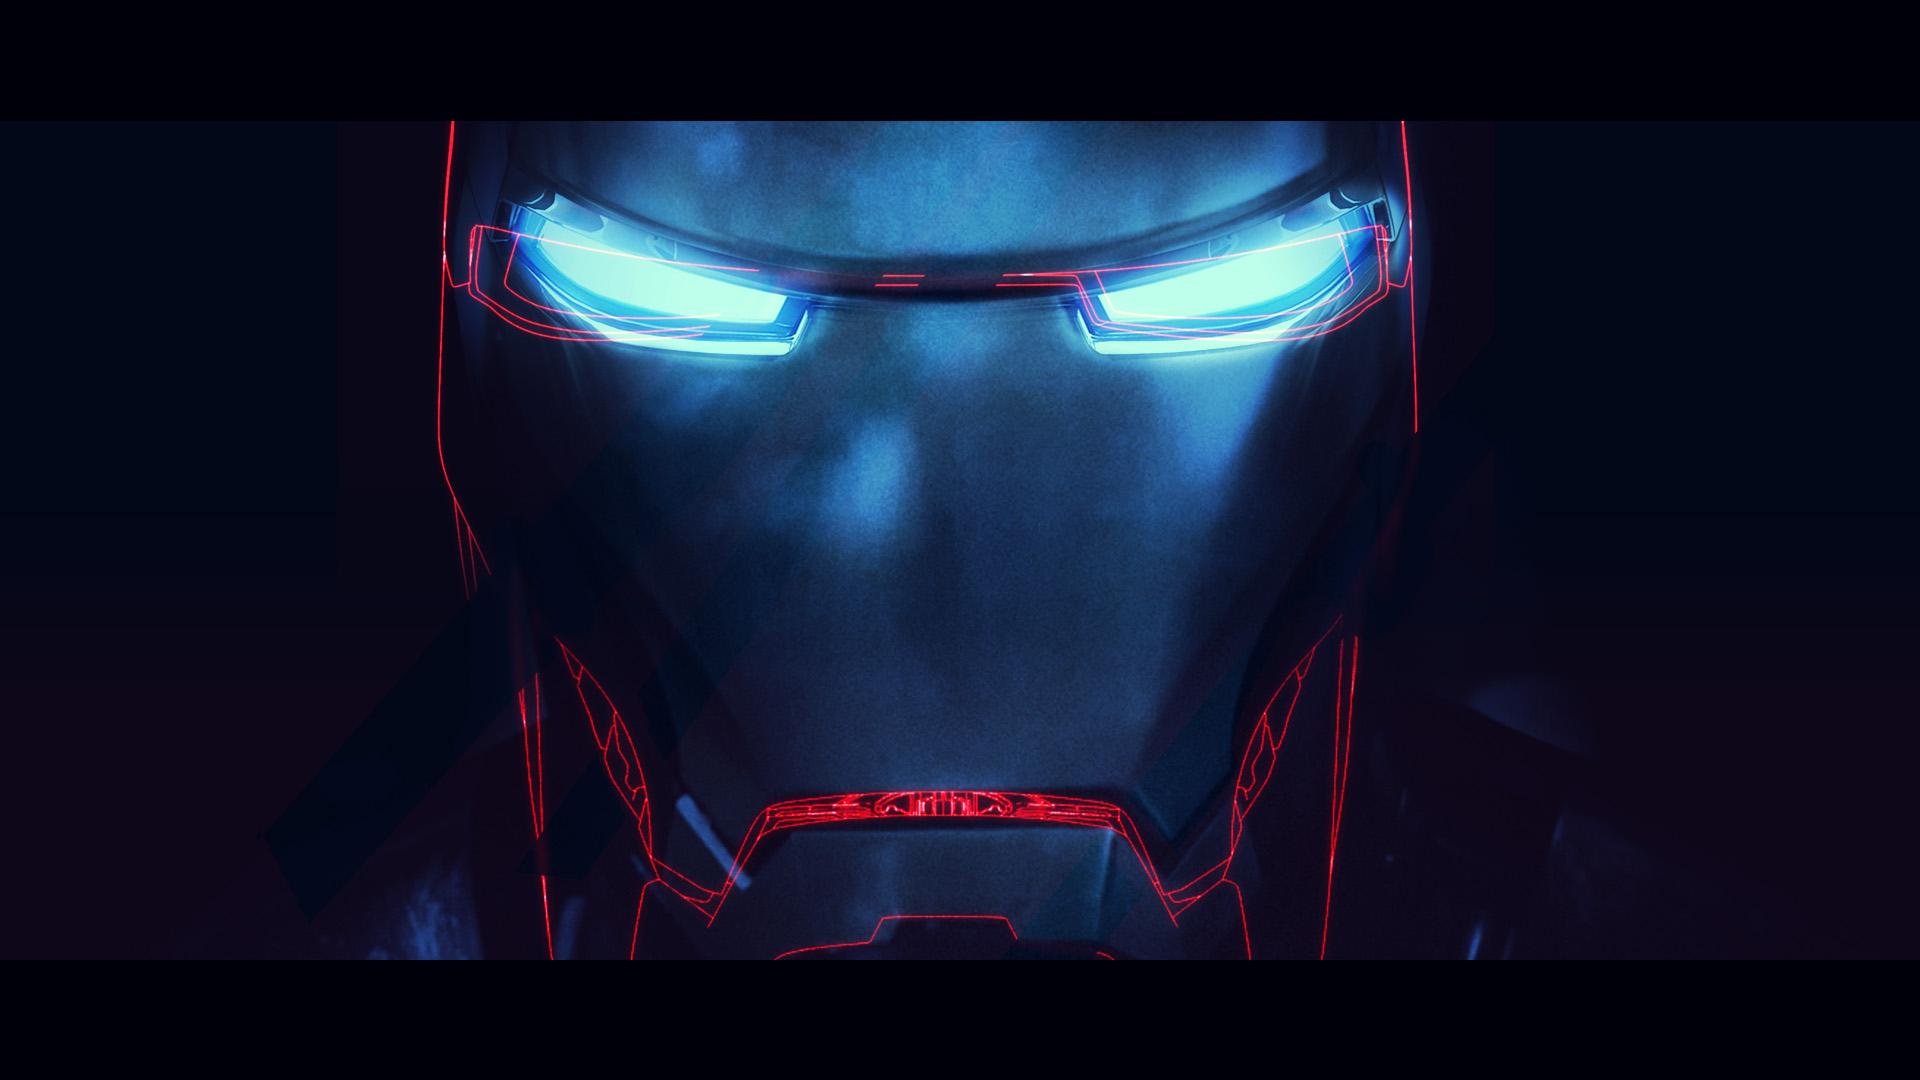 Iron man - (#94999) - High Quality and Resolution Wallpapers on ...